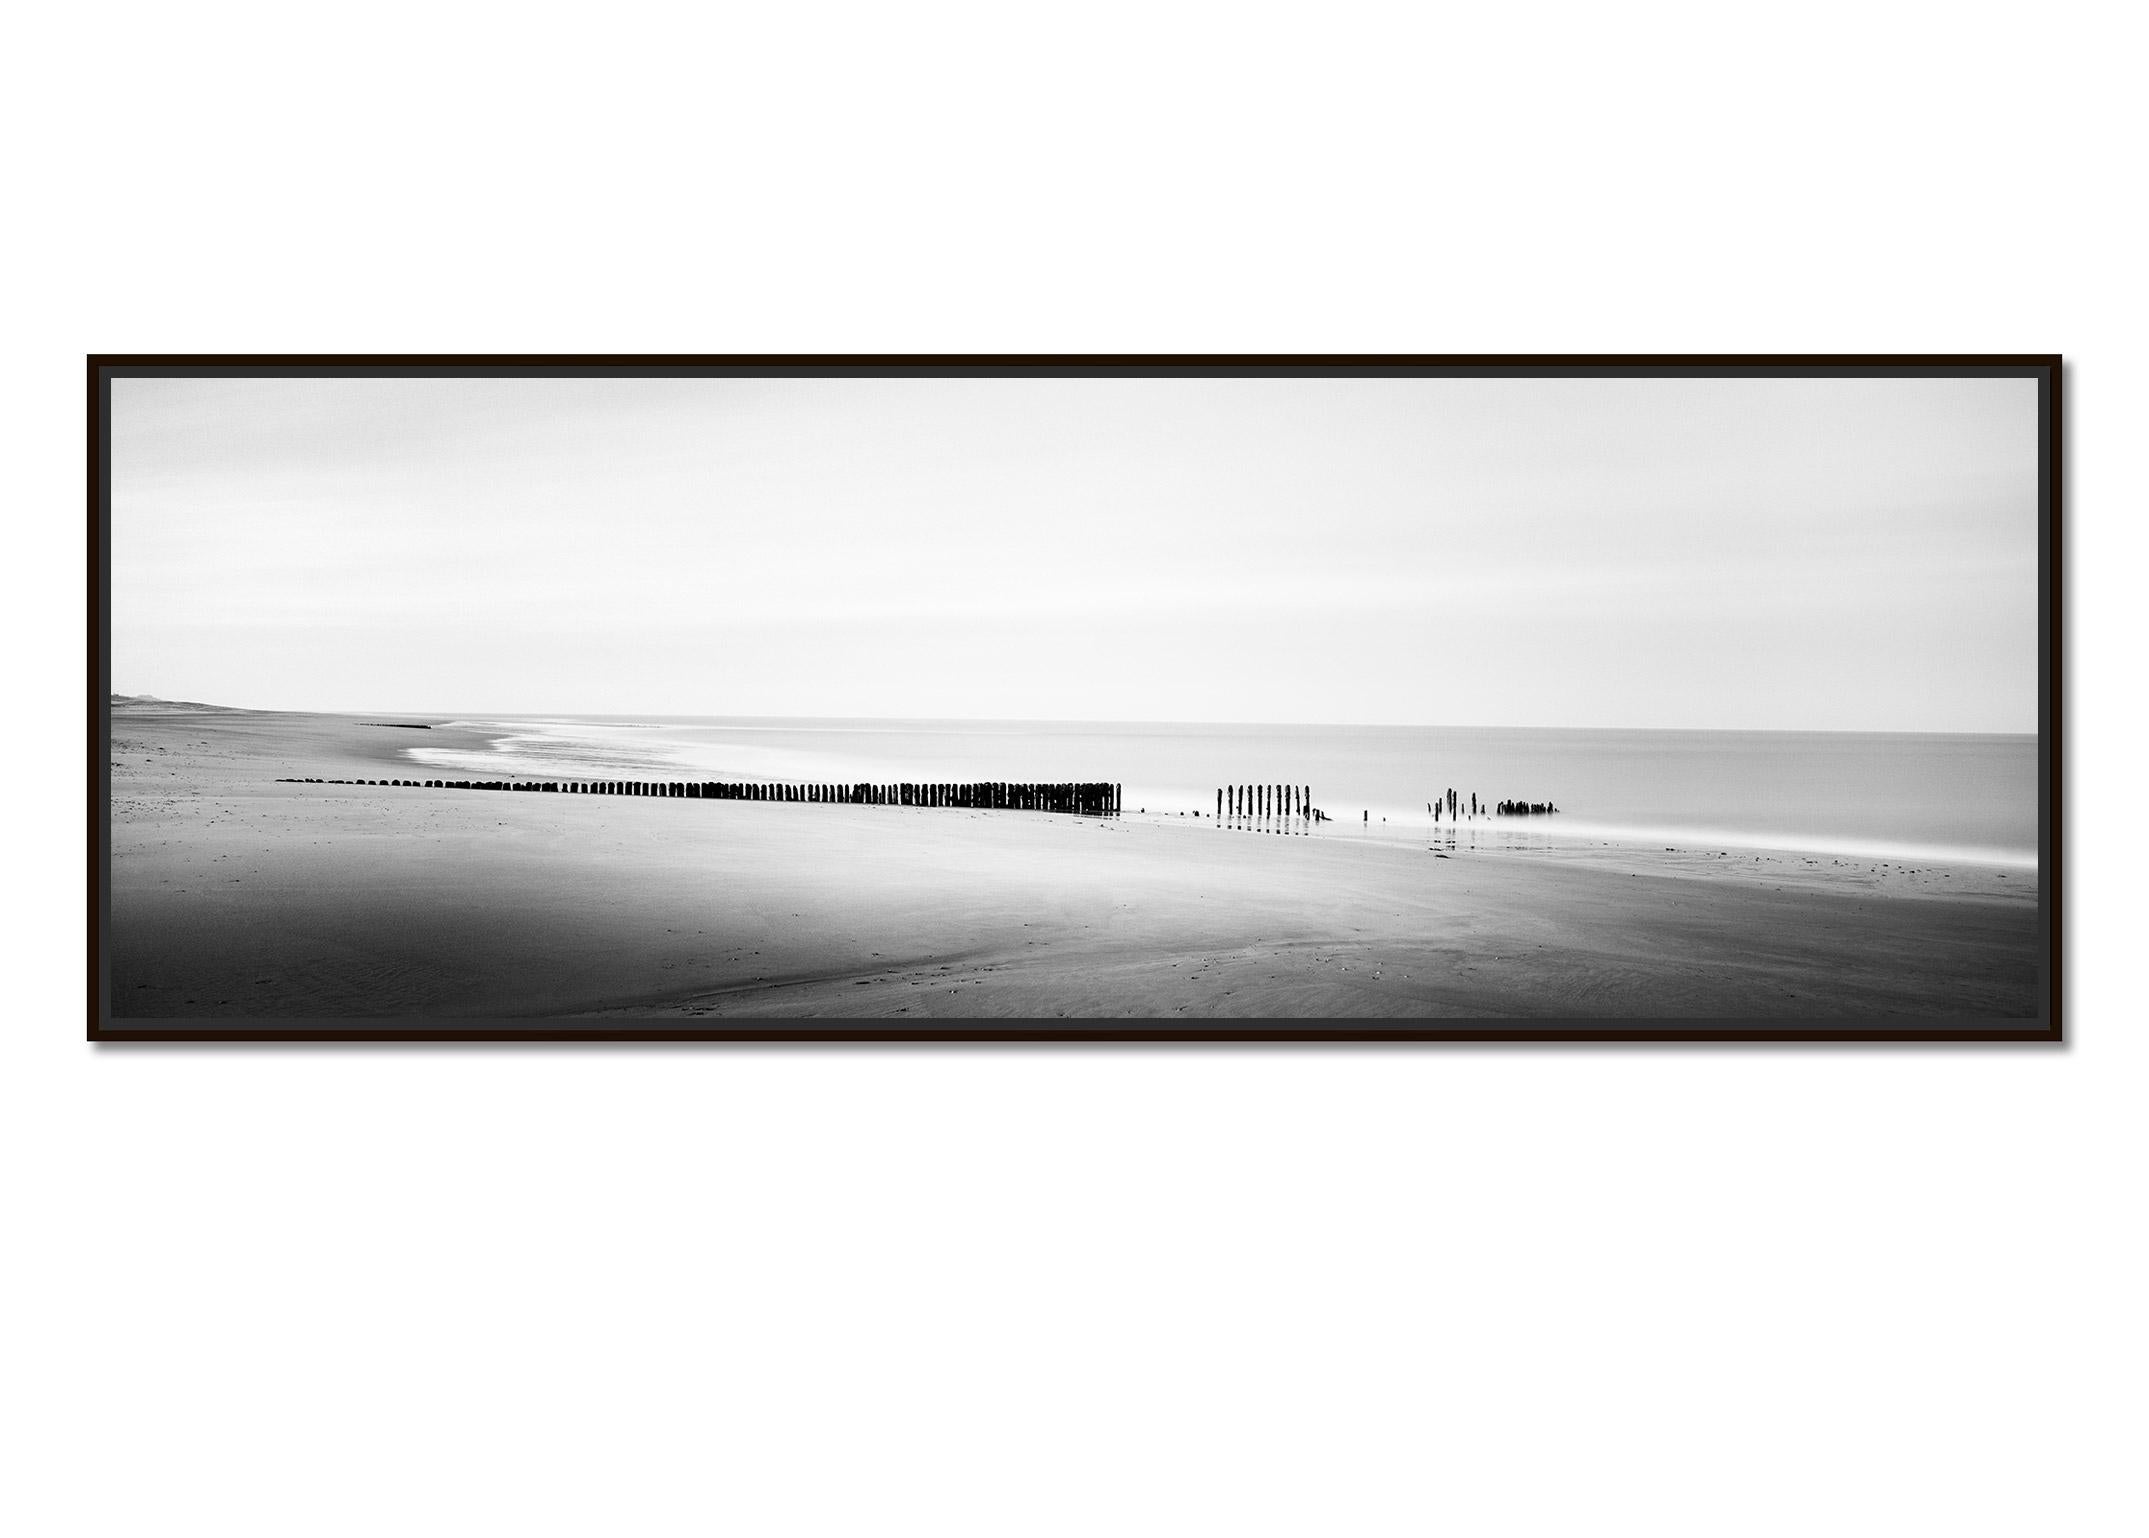 Broken Groyne, Beach, Sylt, Germany, black and white landscape photography print - Photograph by Gerald Berghammer